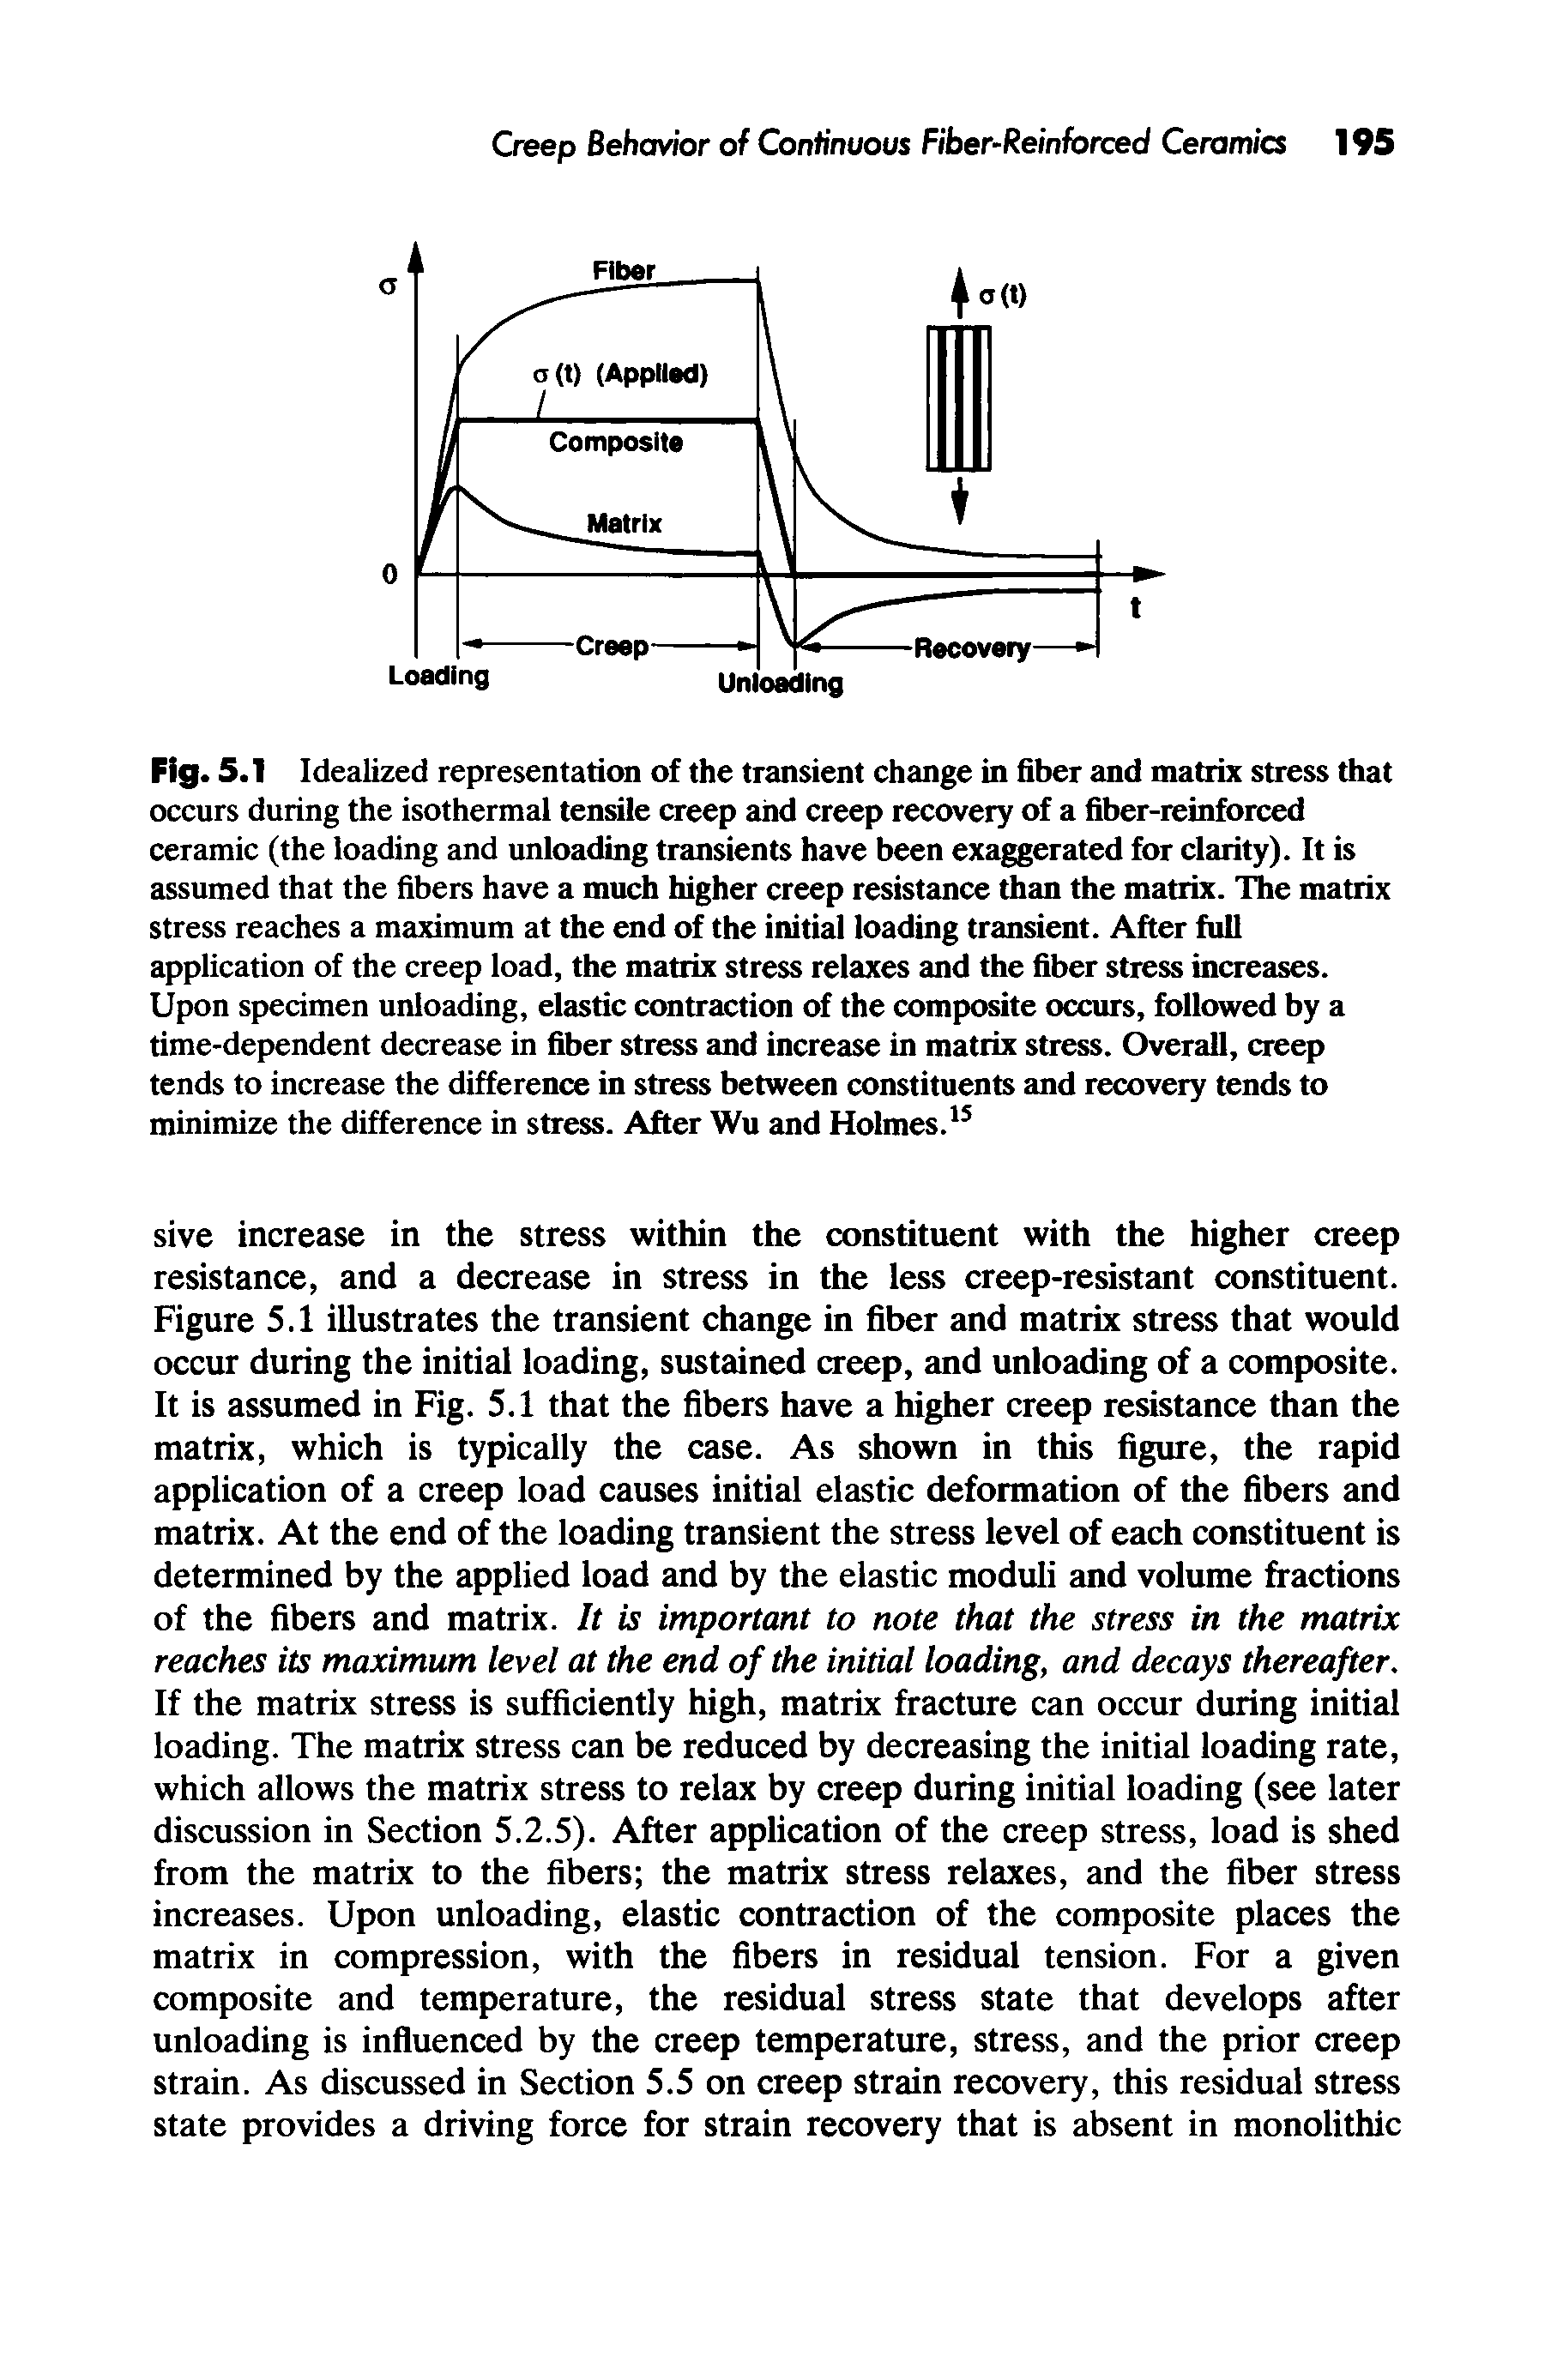 Fig. 5.1 Idealized representation of the transient change in fiber and matrix stress that occurs during the isothermal tensile creep and creep recovery of a fiber-reinforced ceramic (the loading and unloading transients have been exaggerated for clarity). It is assumed that the fibers have a much higher creep resistance than the matrix. The matrix stress reaches a maximum at the end of the initial loading transient. After full application of the creep load, the matrix stress relaxes and the fiber stress increases. Upon specimen unloading, elastic contraction of the composite occurs, followed by a time-dependent decrease in fiber stress and increase in matrix stress. Overall, creep tends to increase the difference in stress between constituents and recovery tends to minimize the difference in stress. After Wu and Holmes.15...